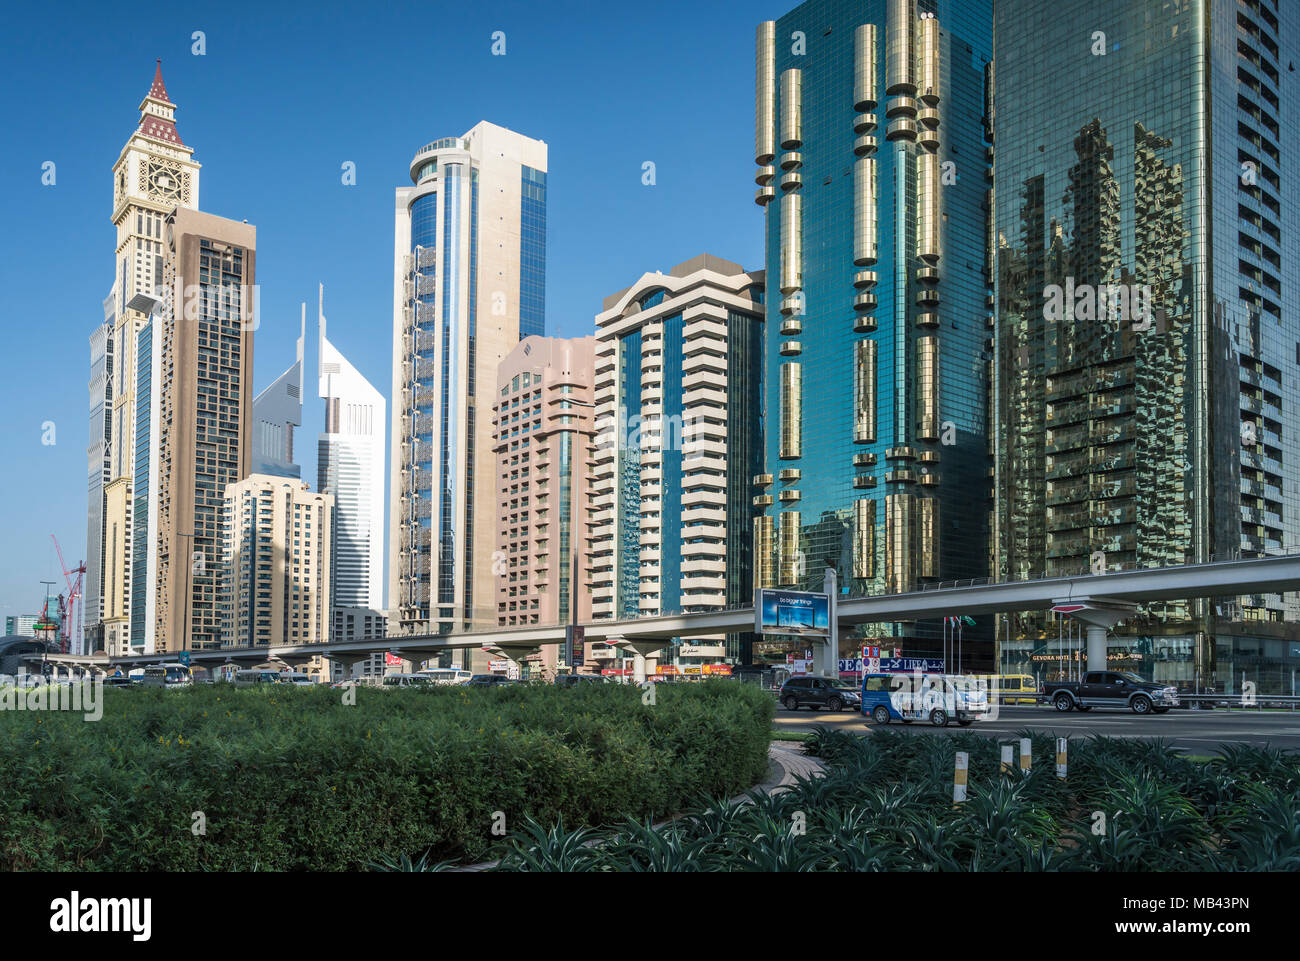 Tall office towers in the Financial district of downtown Dubai, UAE, Middle East. Stock Photo